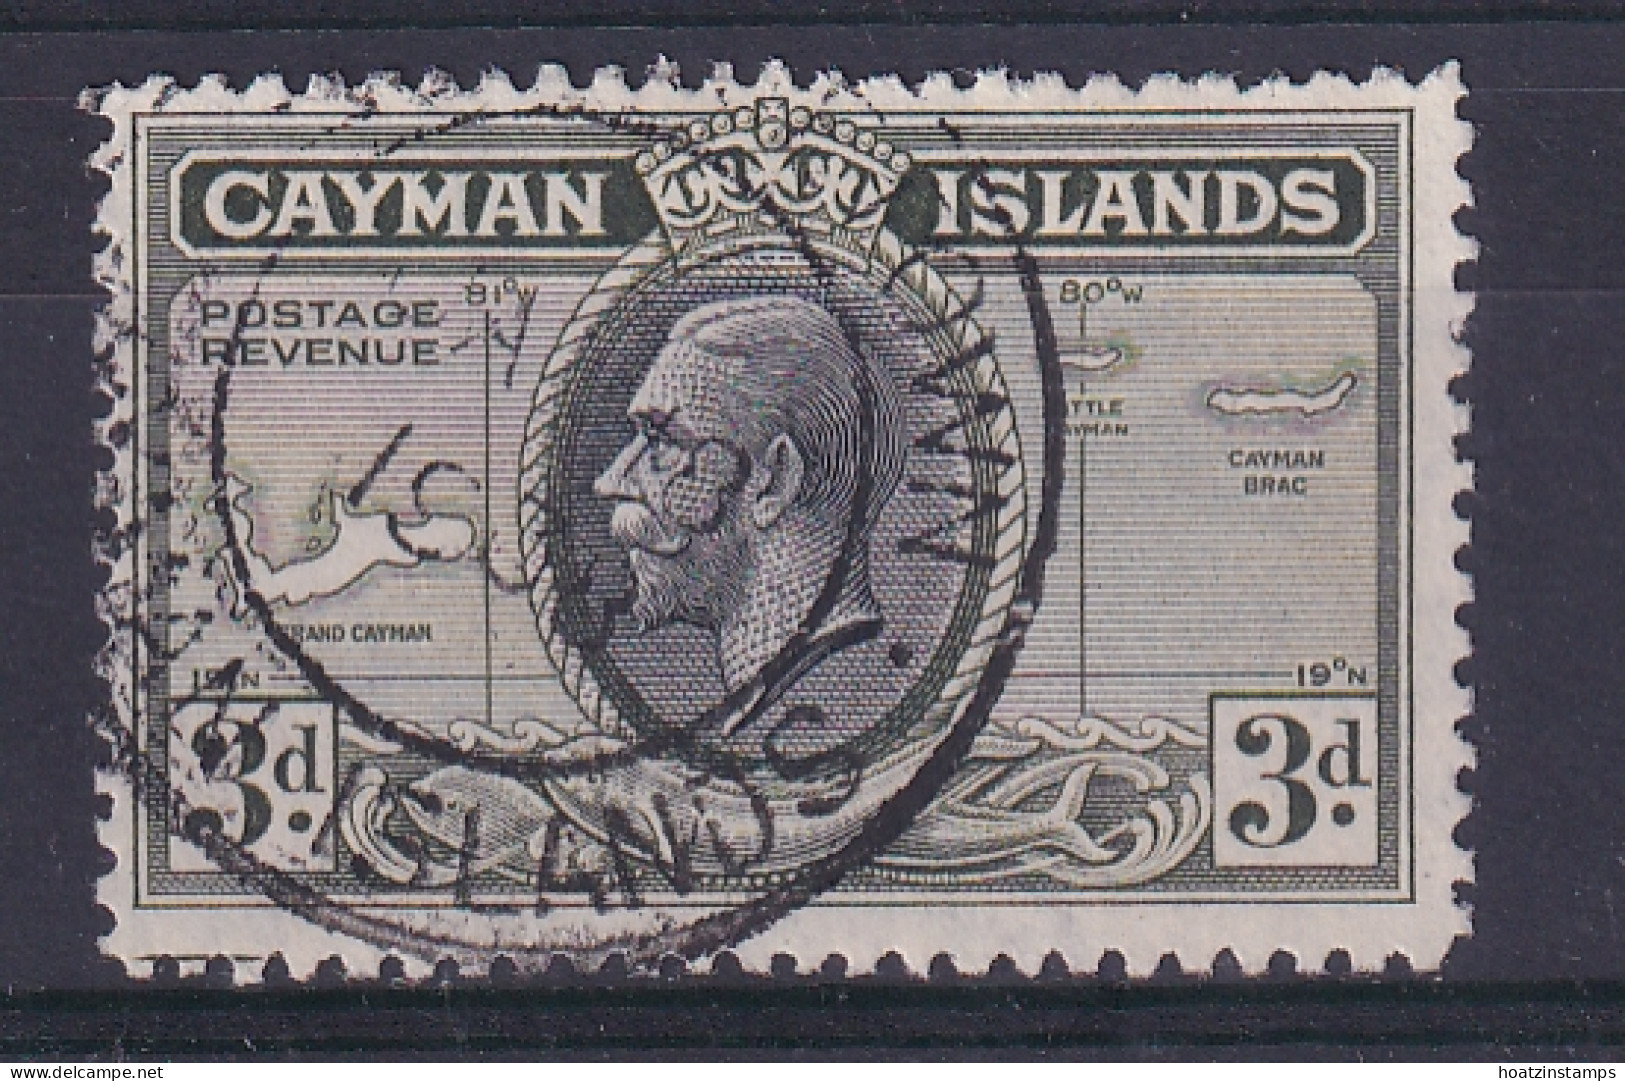 Cayman Islands: 1935   KGV - Pictorial   SG102   3d    Used - Kaimaninseln